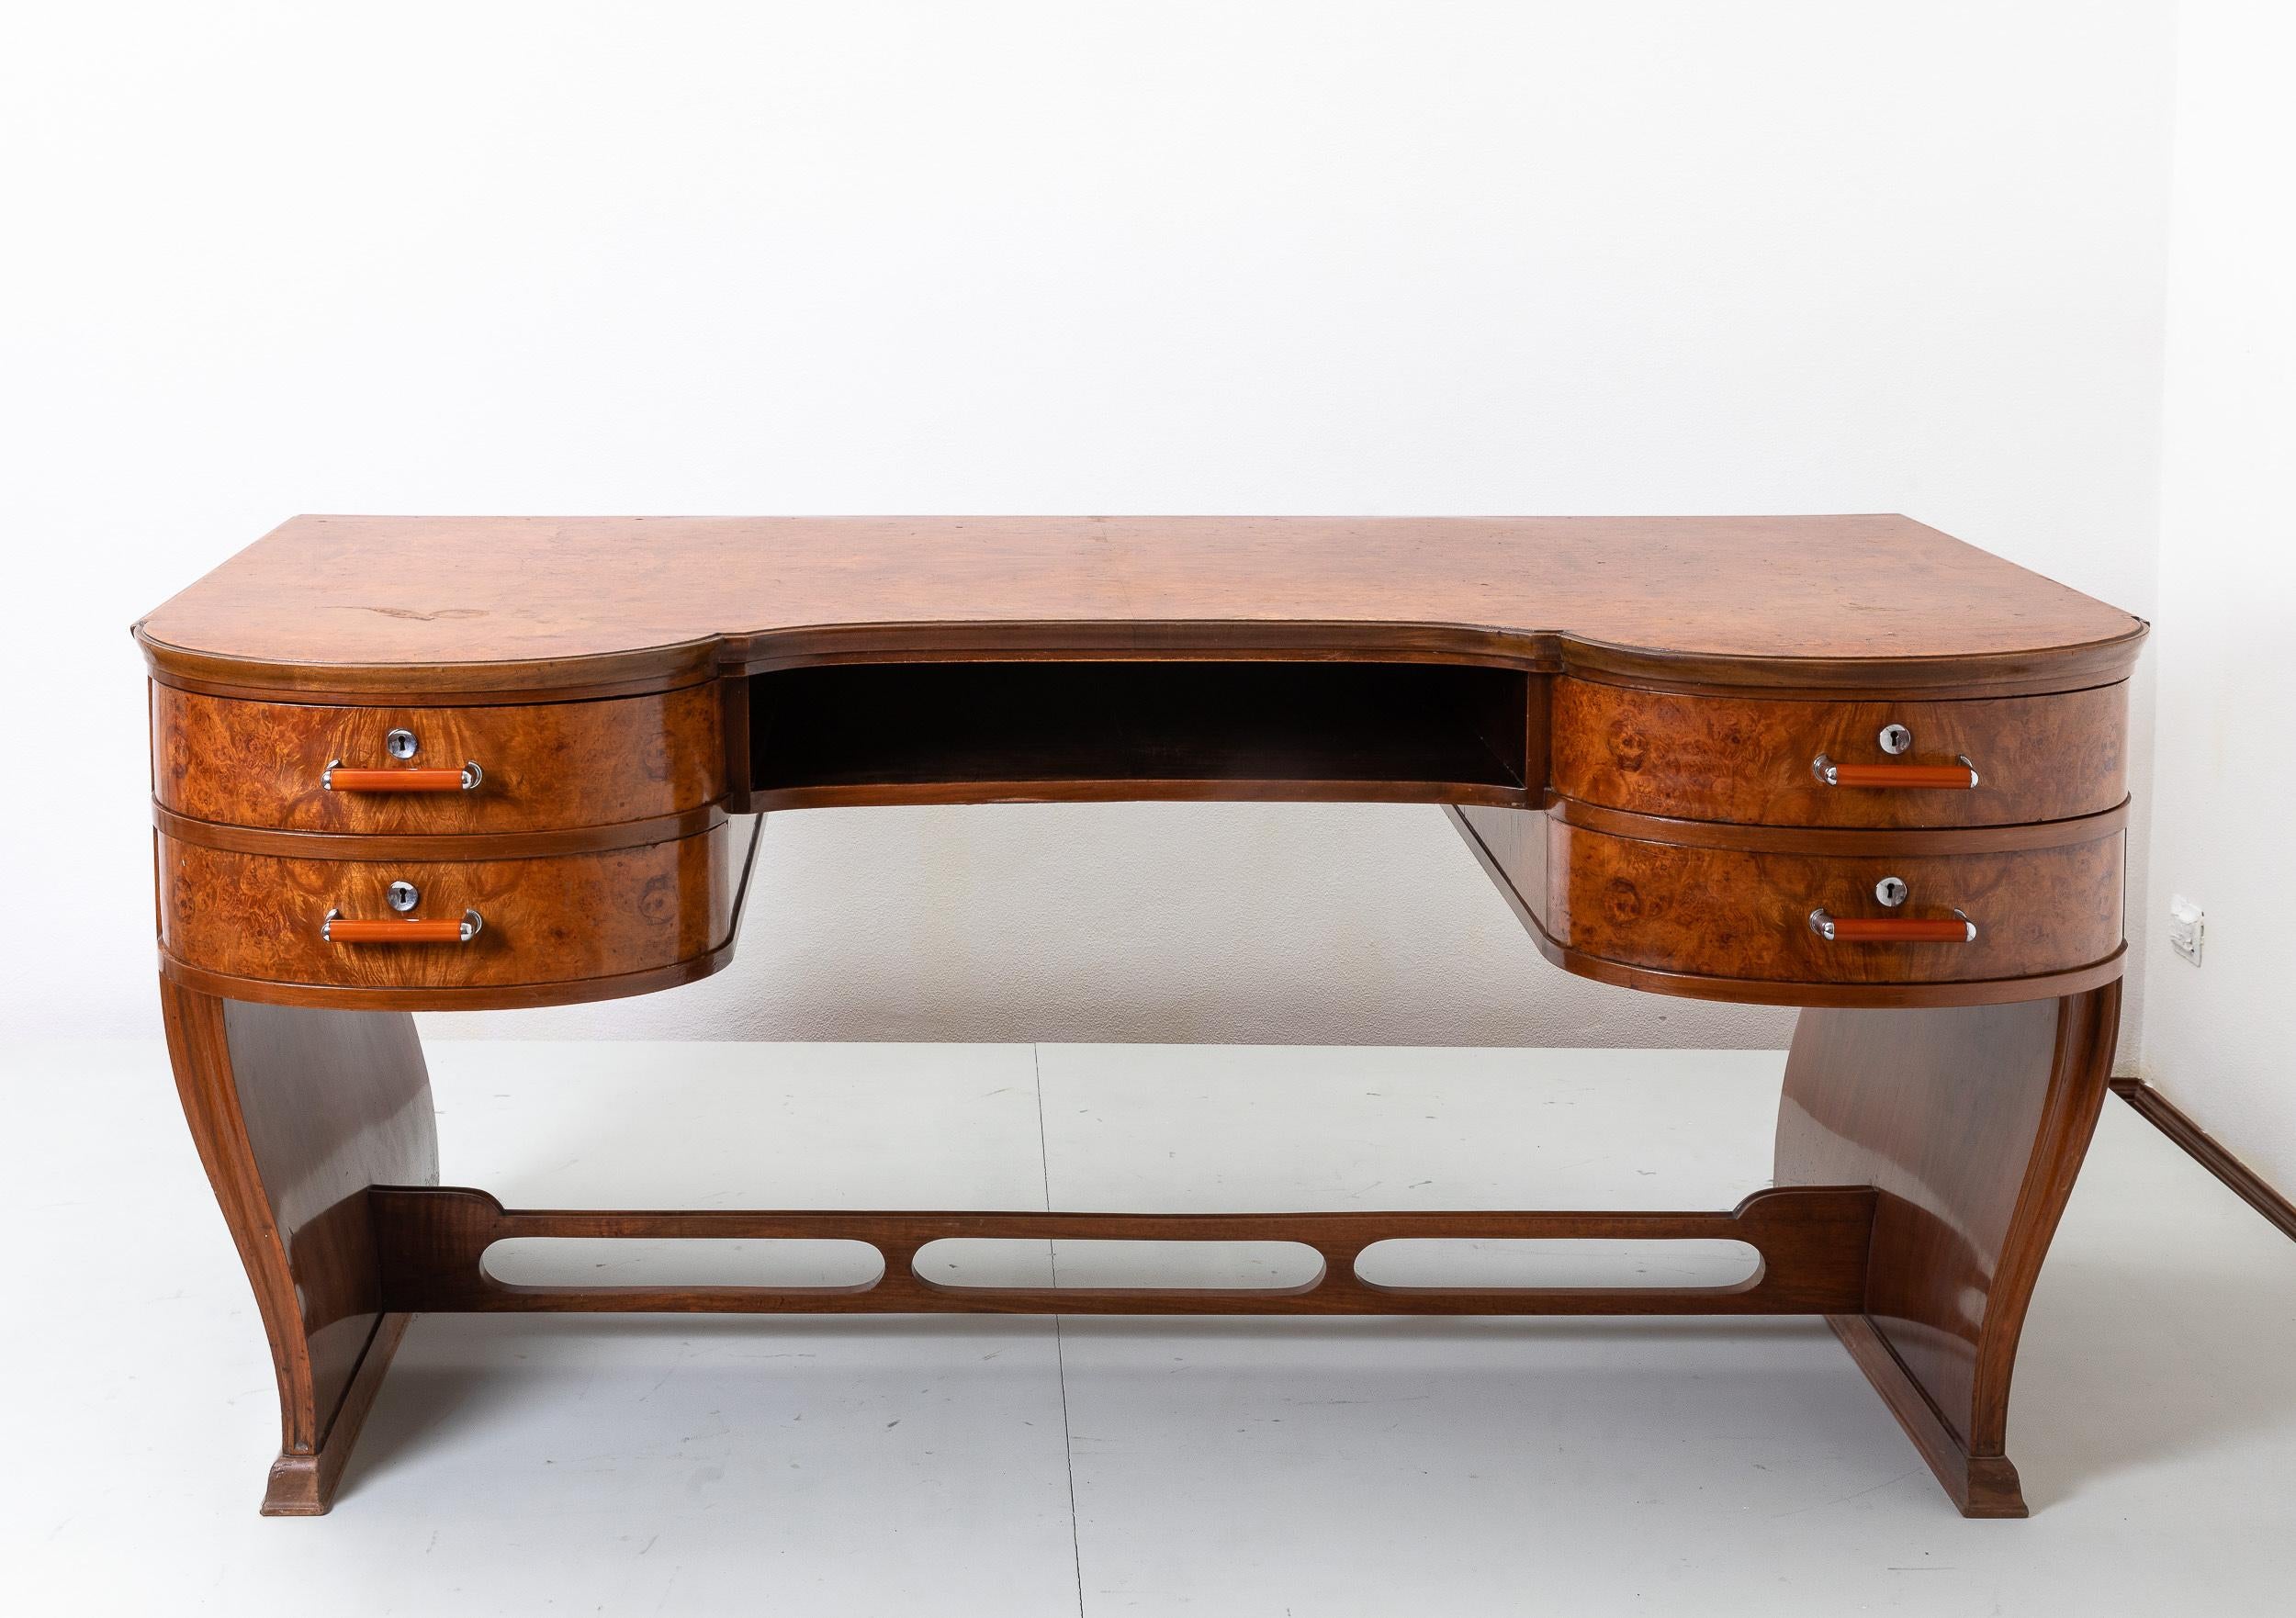 Prod. Italy, c. 1930 Deco desk with curvilinear forms  For Sale 1